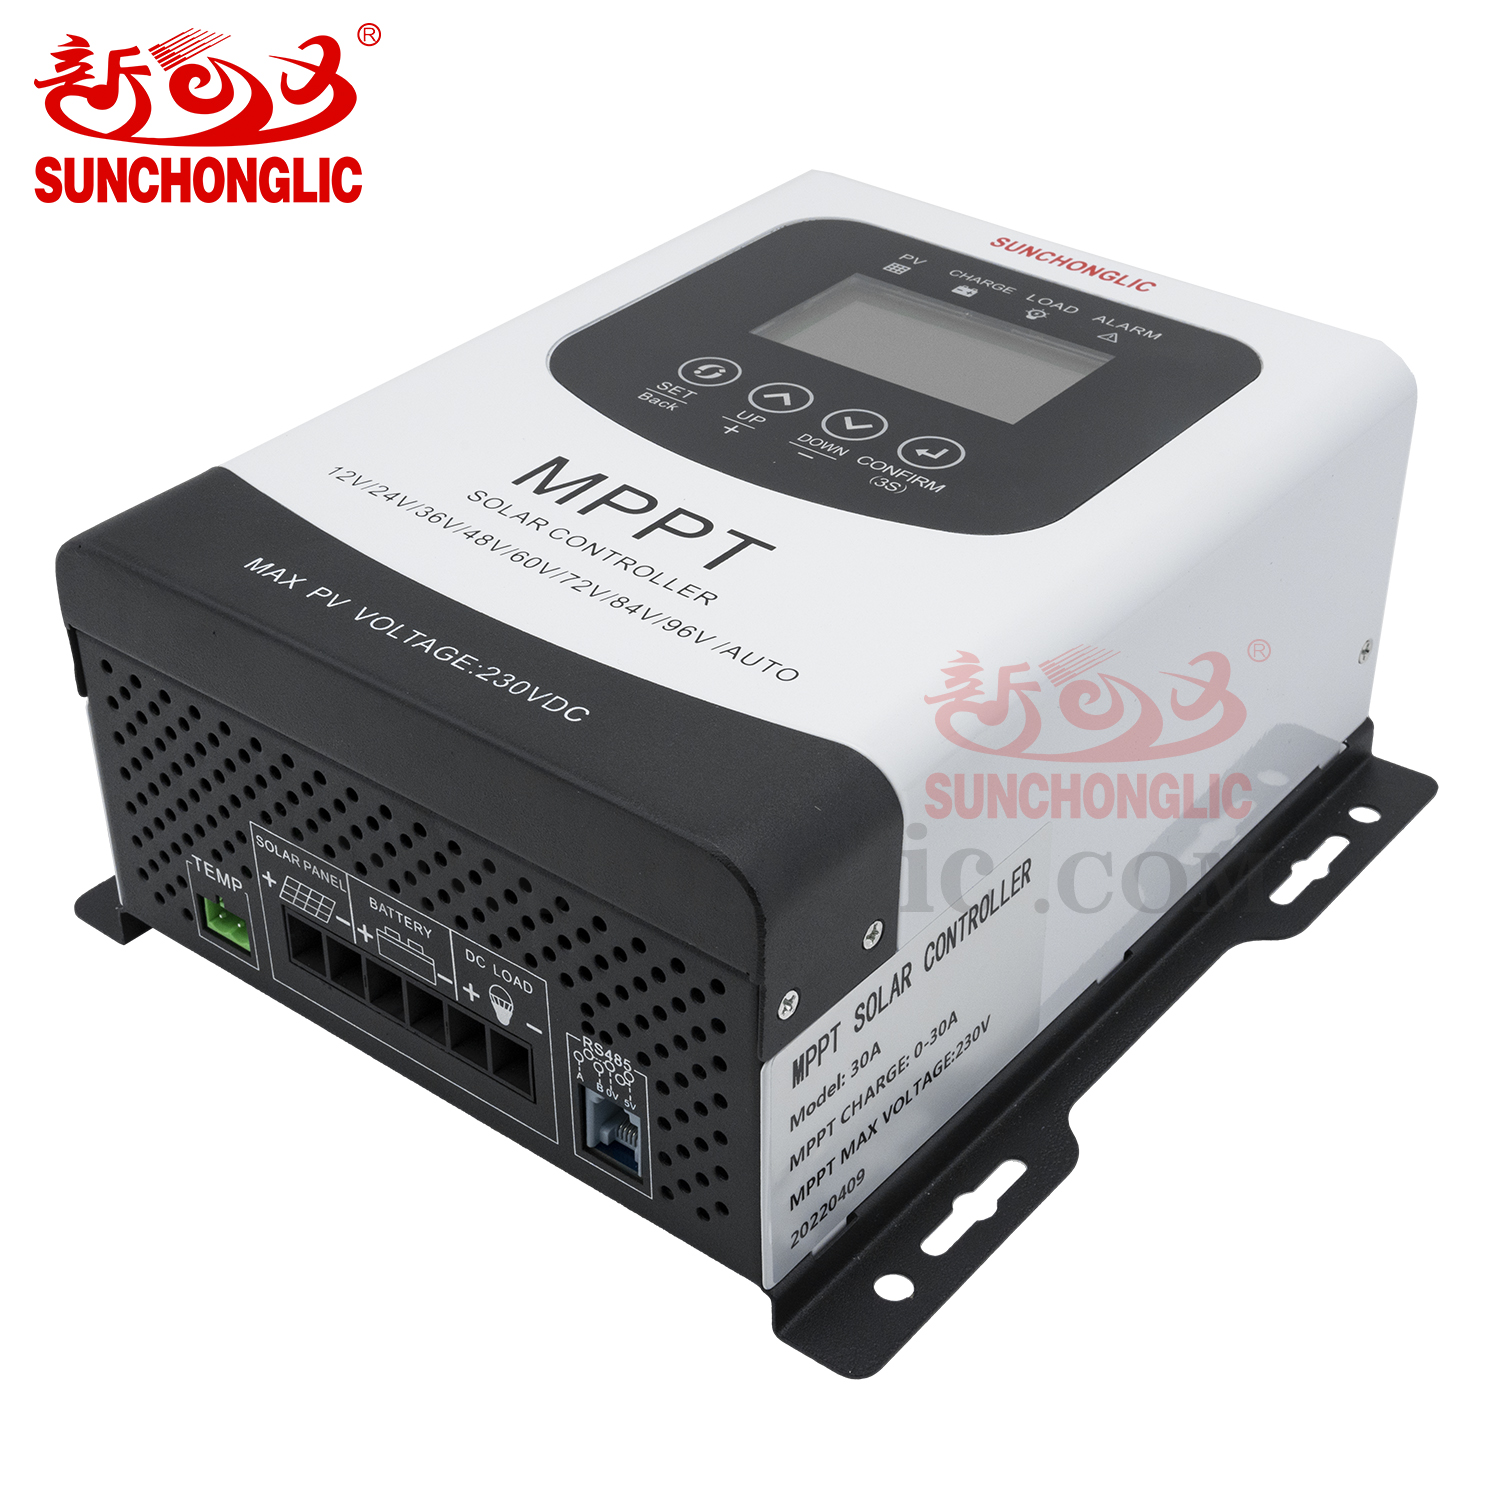 Solar Charge Controller - MPPT 30A